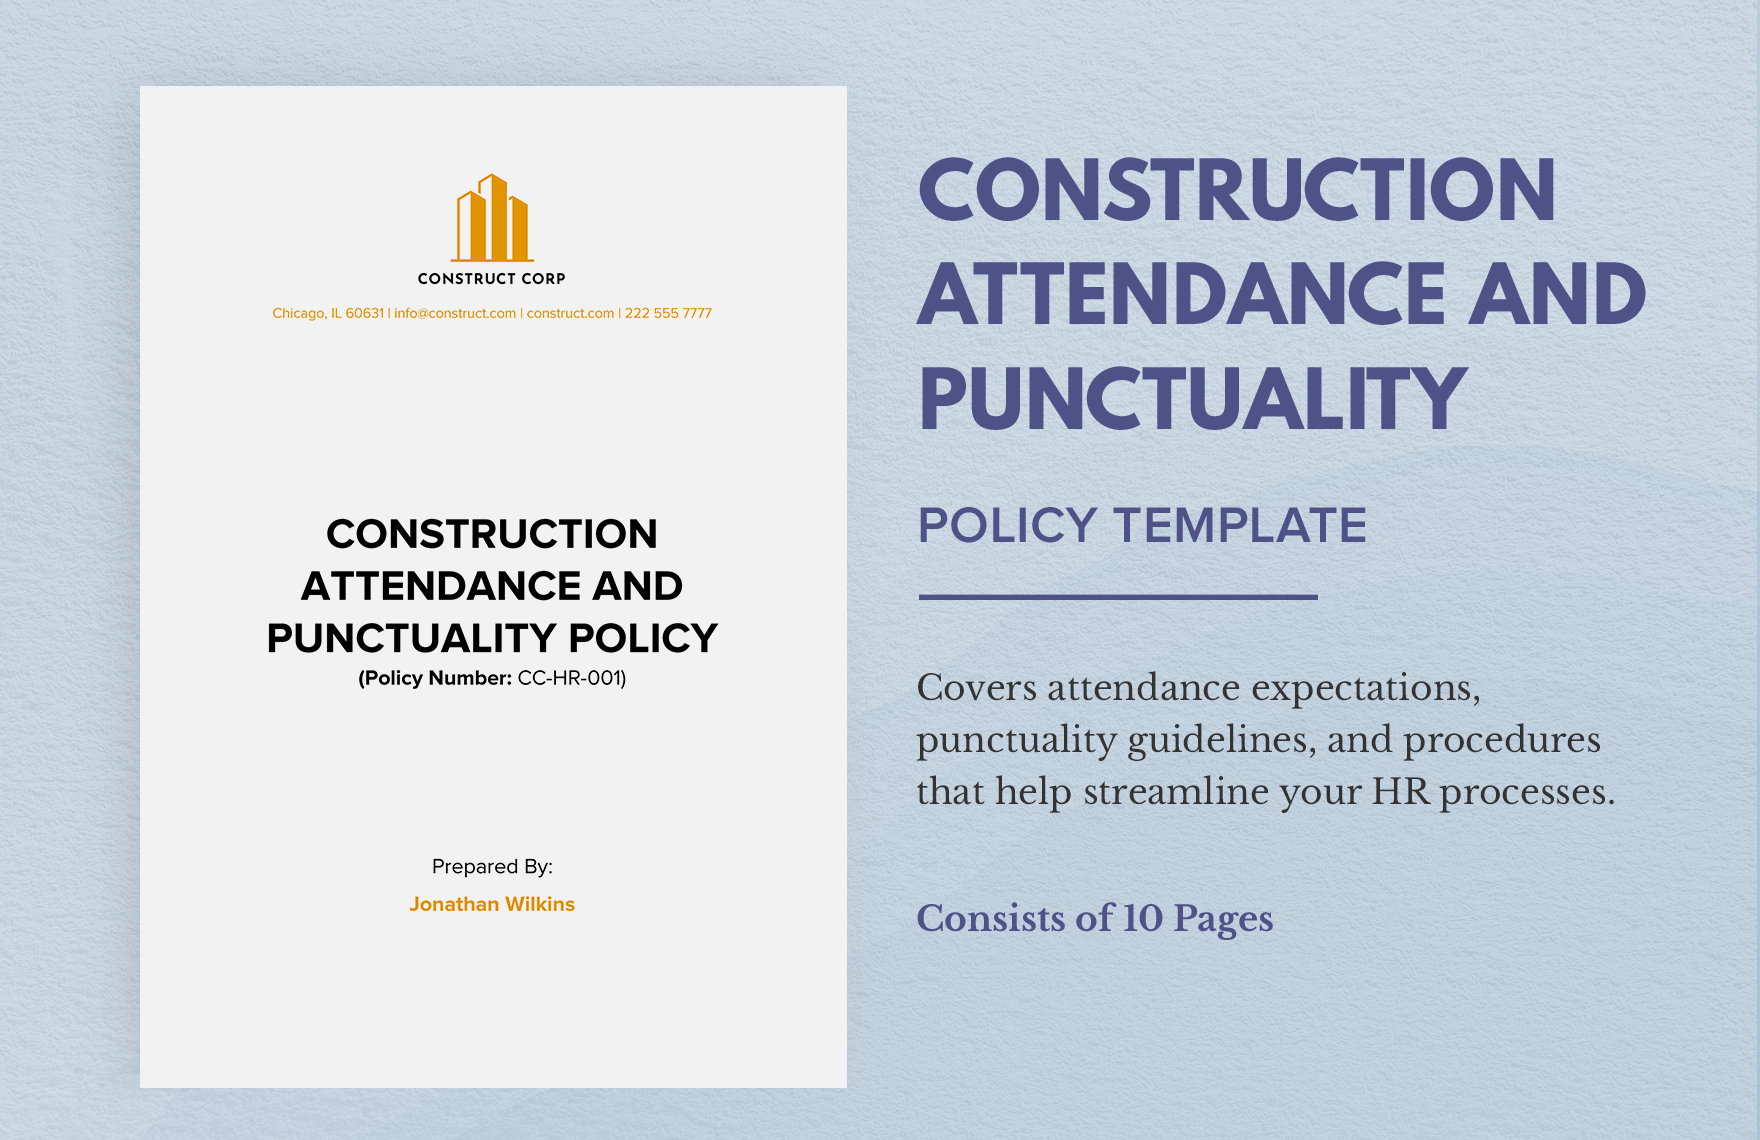 Construction Attendance and Punctuality Policy Template